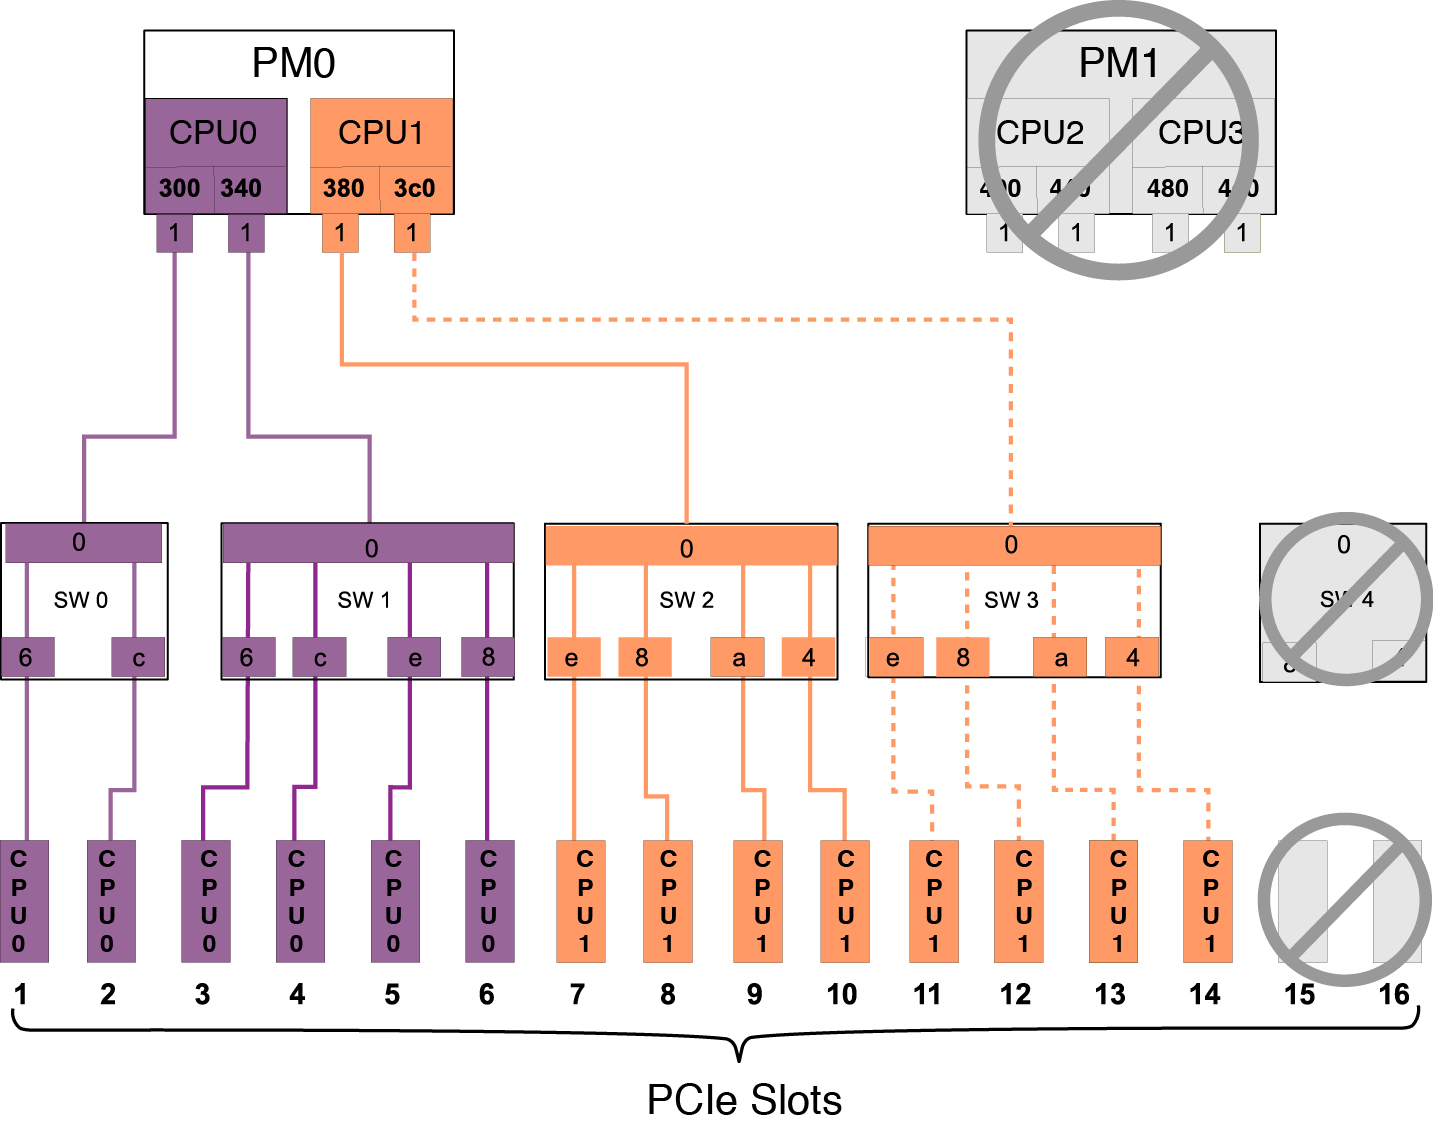 image:Graphic showing the root complex topology for a server with PM1 not present.